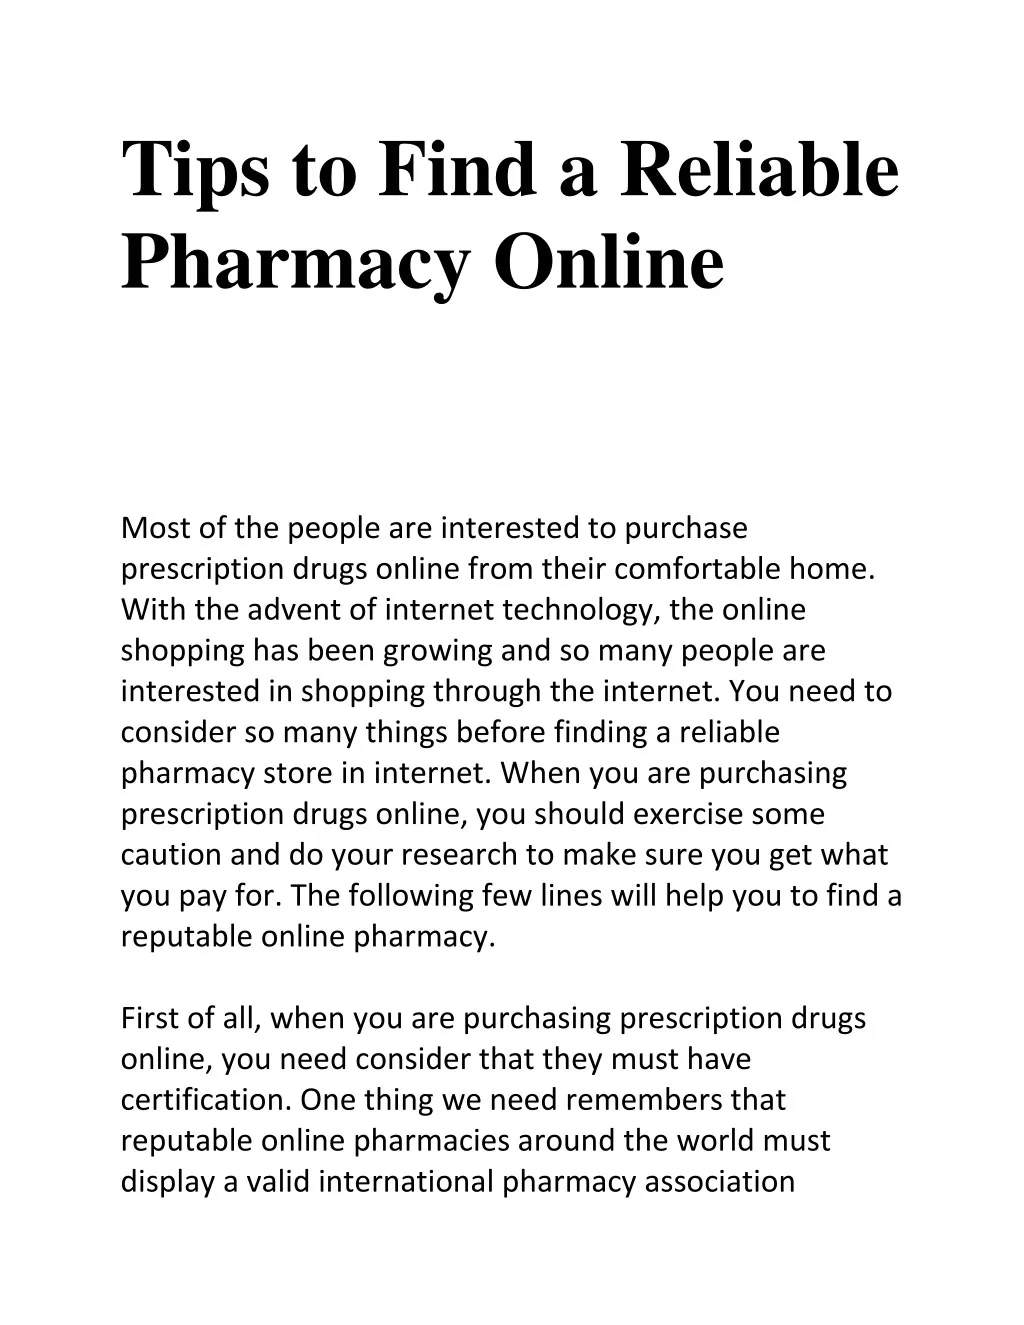 tips to find a reliable pharmacy online